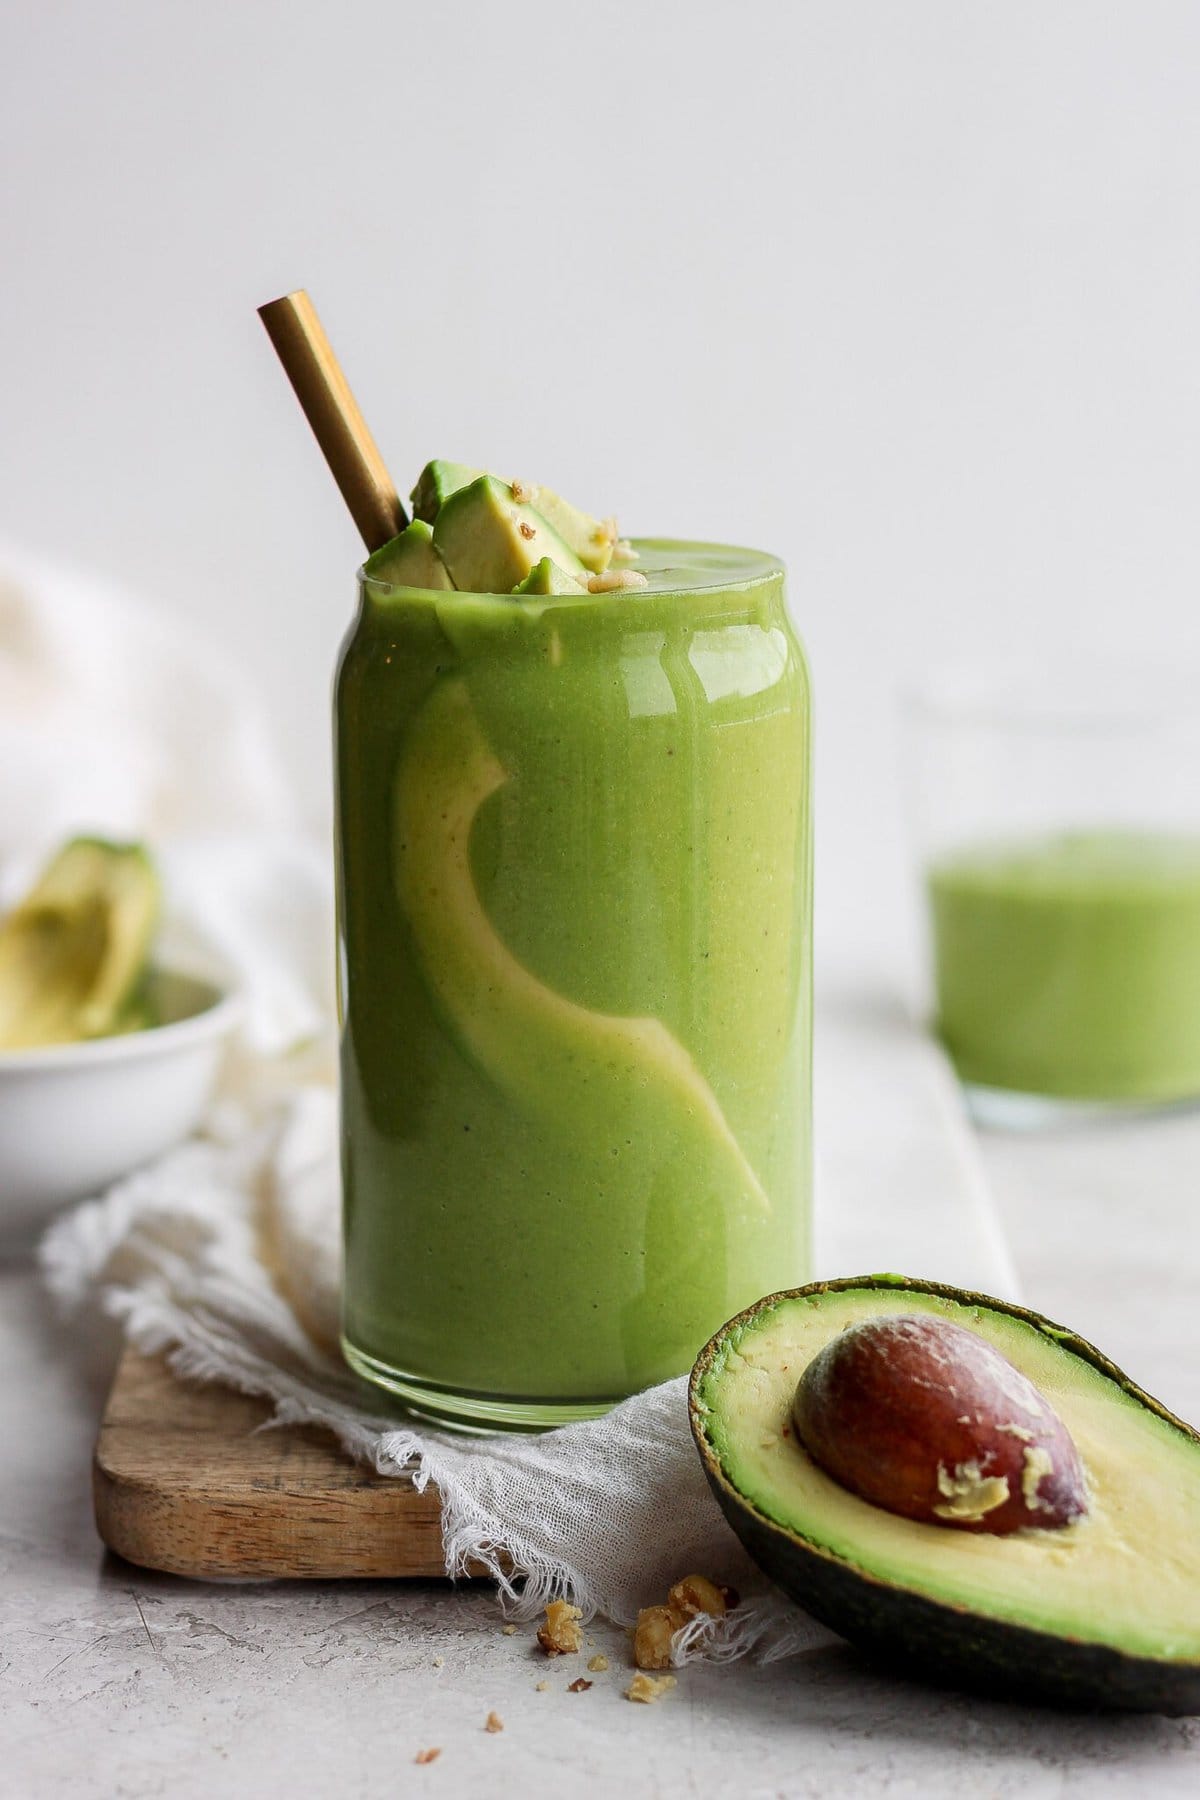 What Is Avocado Juice Made Of Typical Of Pati?